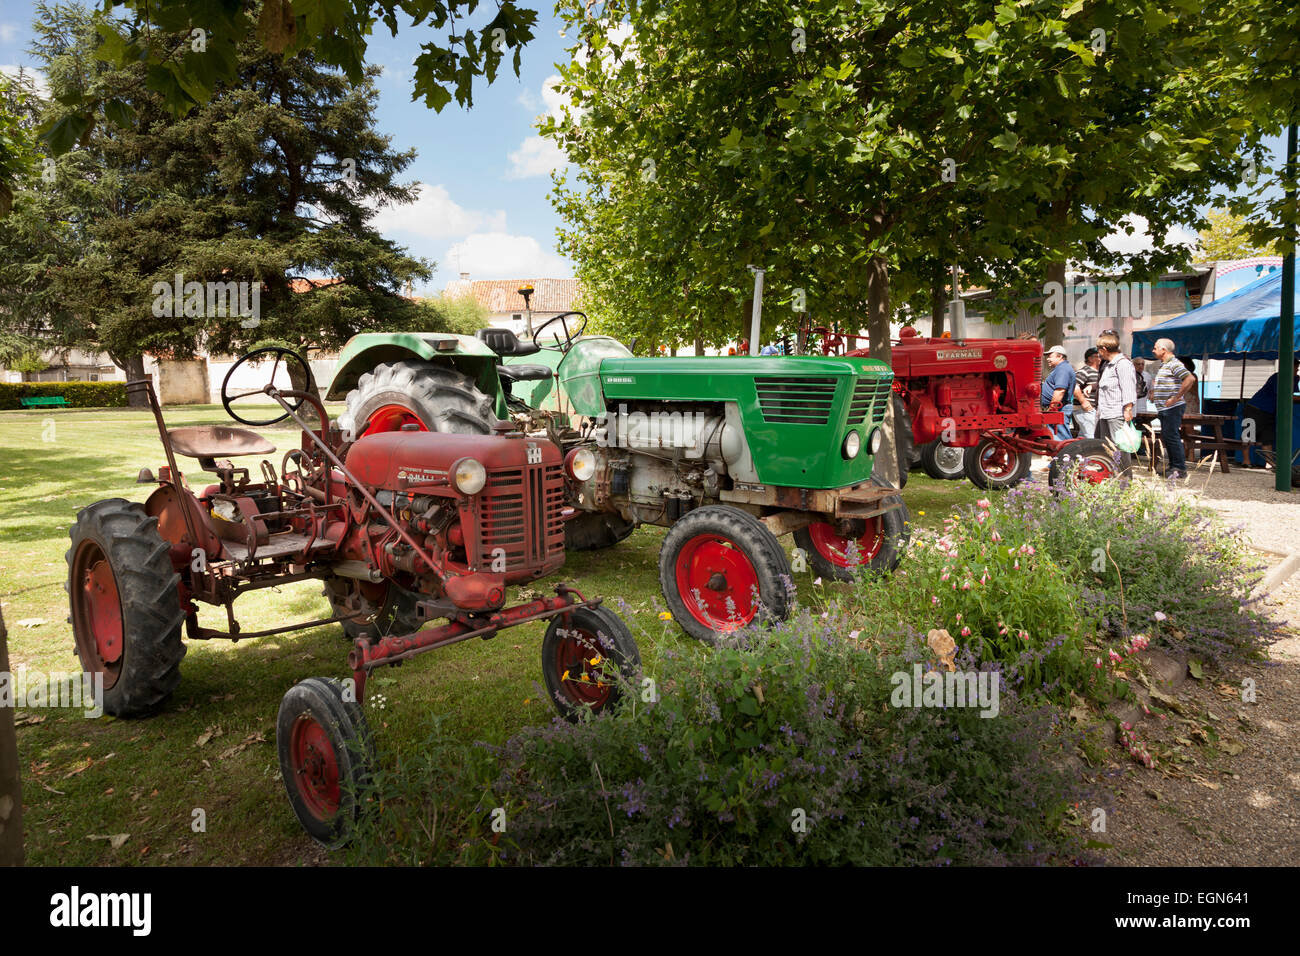 New old and vintage tractors on display at show in Aigre France Stock Photo